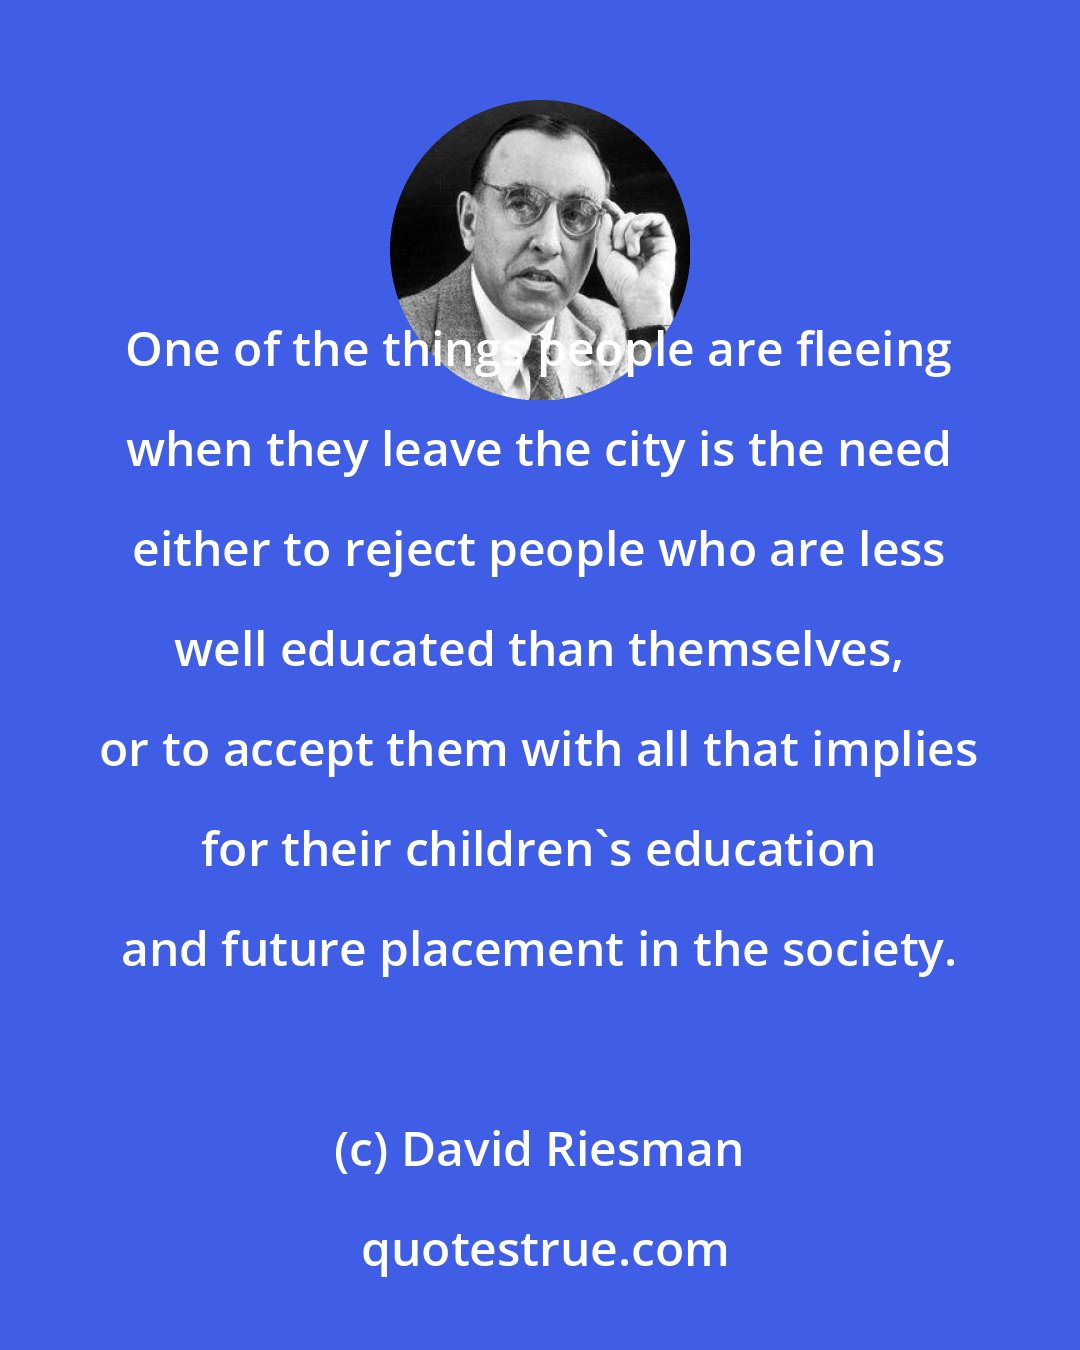 David Riesman: One of the things people are fleeing when they leave the city is the need either to reject people who are less well educated than themselves, or to accept them with all that implies for their children's education and future placement in the society.